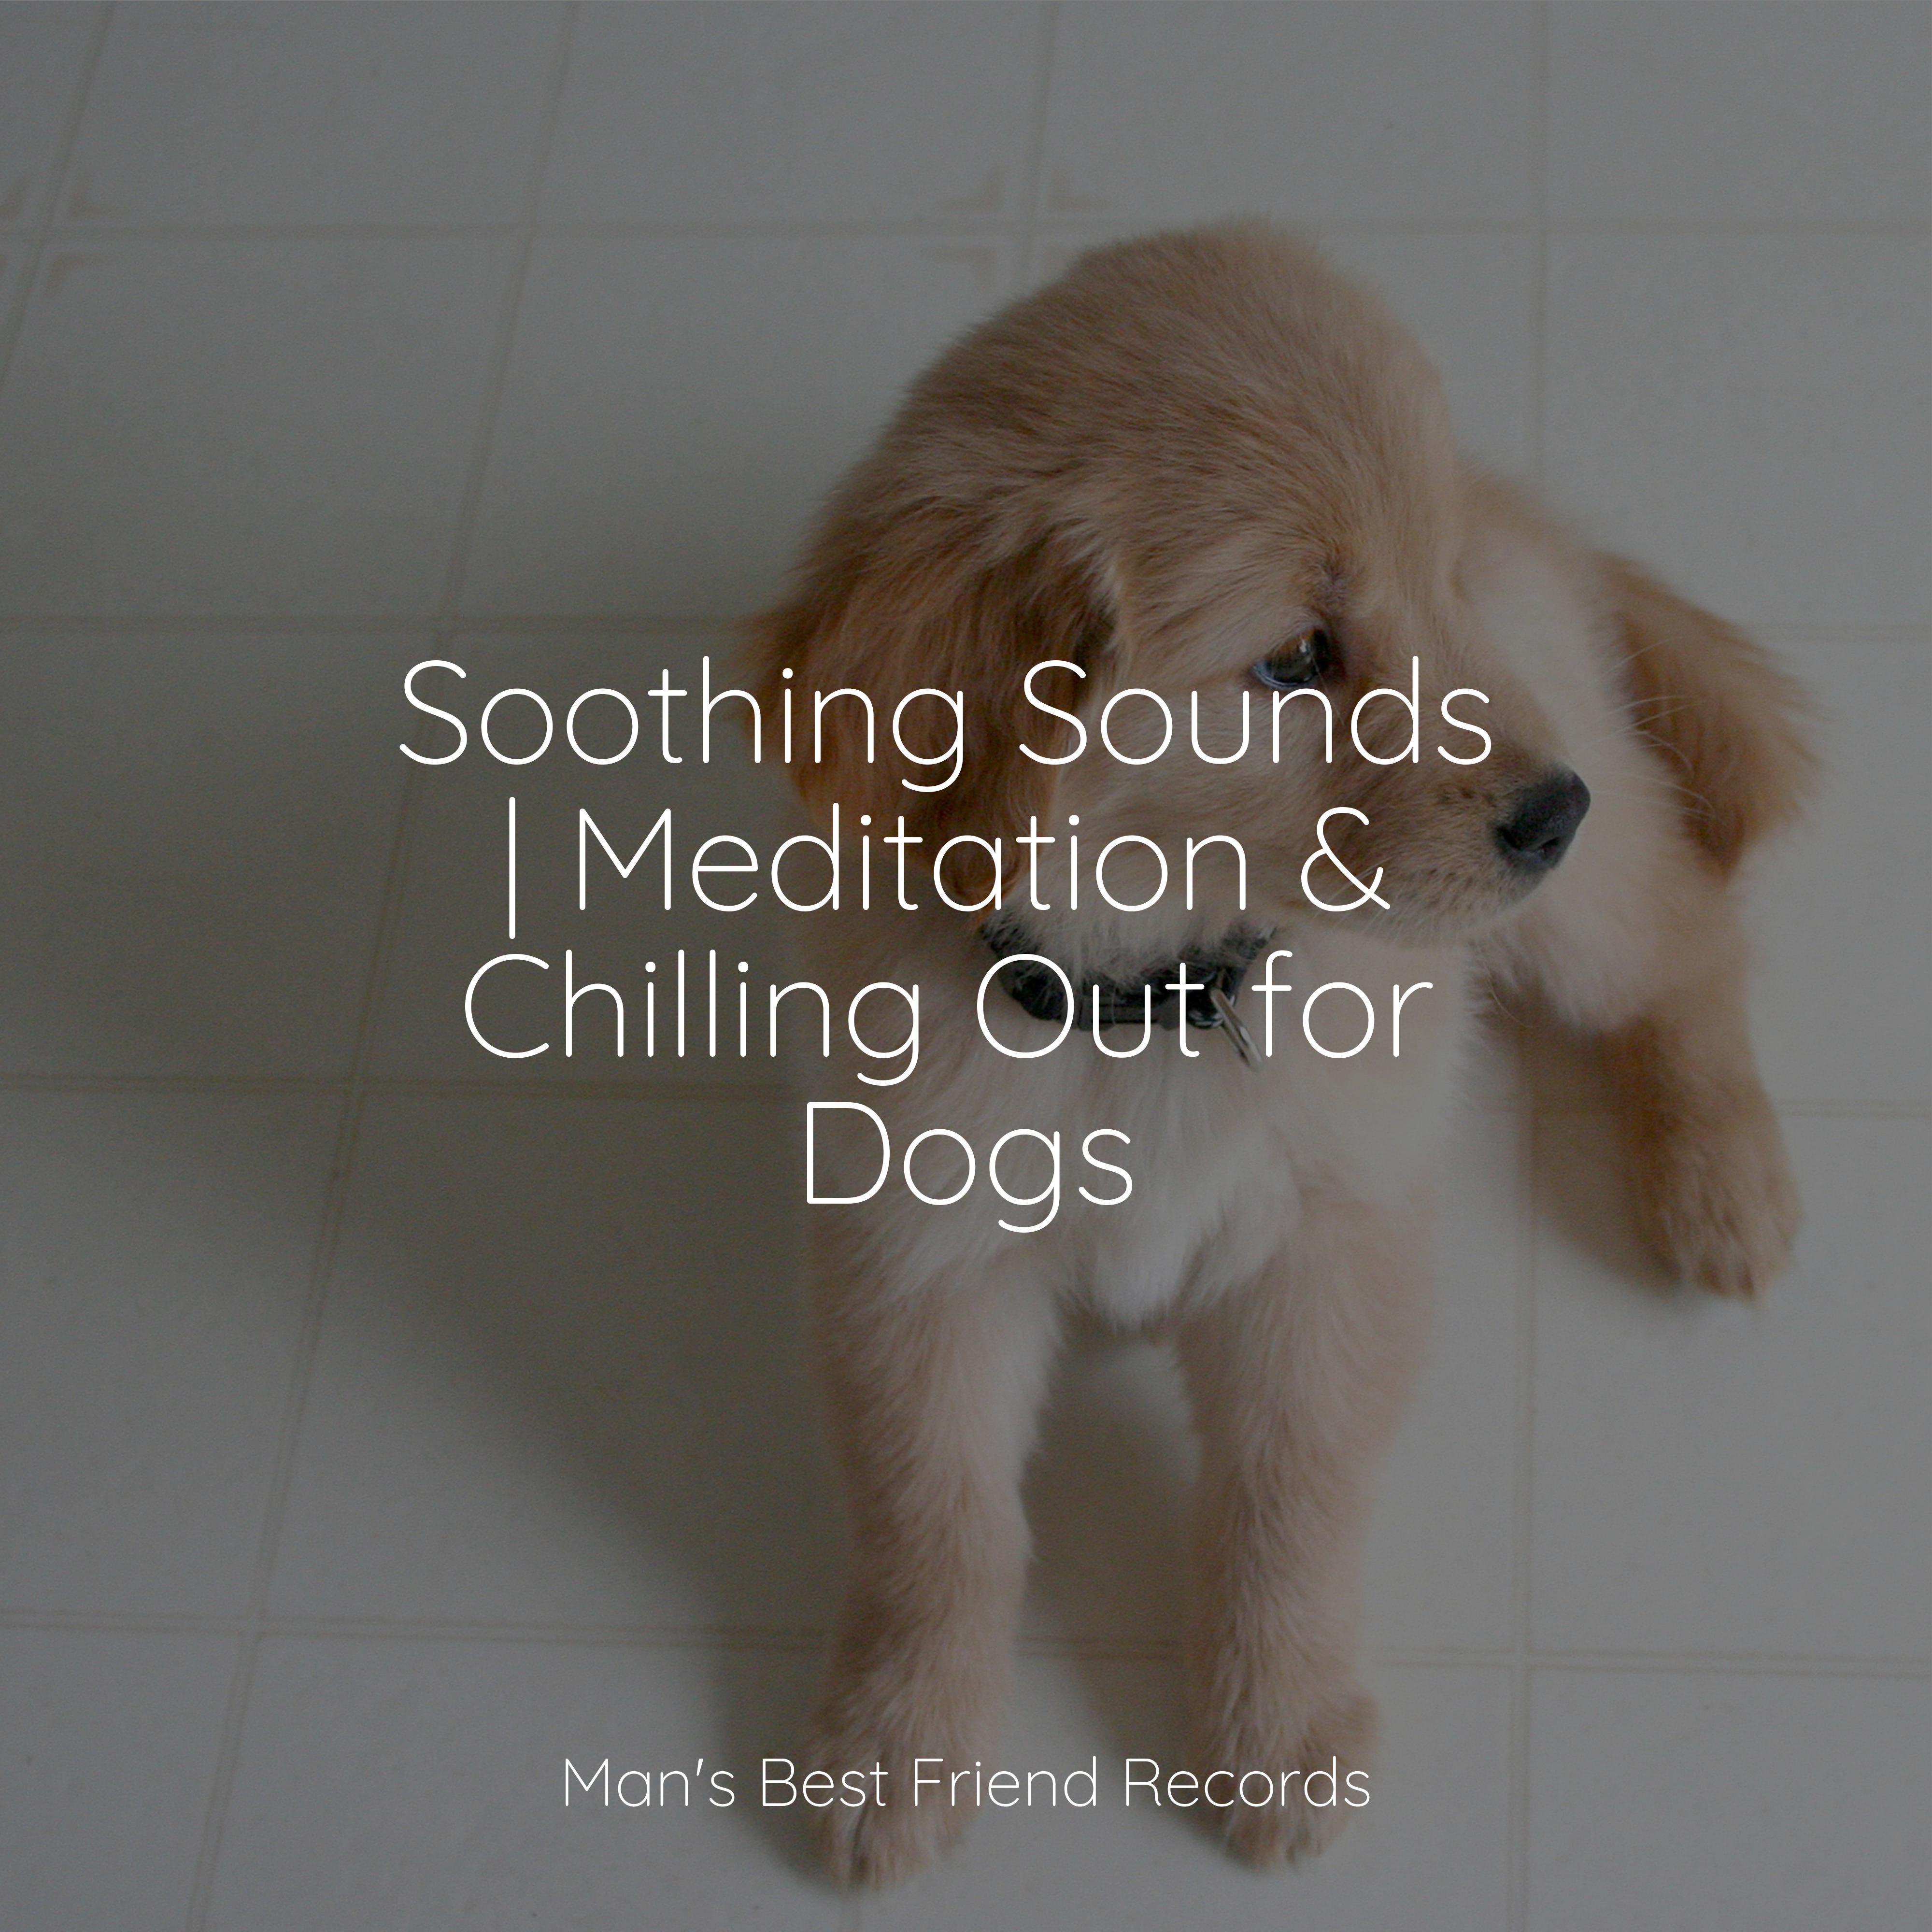 Calming Music for Dogs - Healing Music